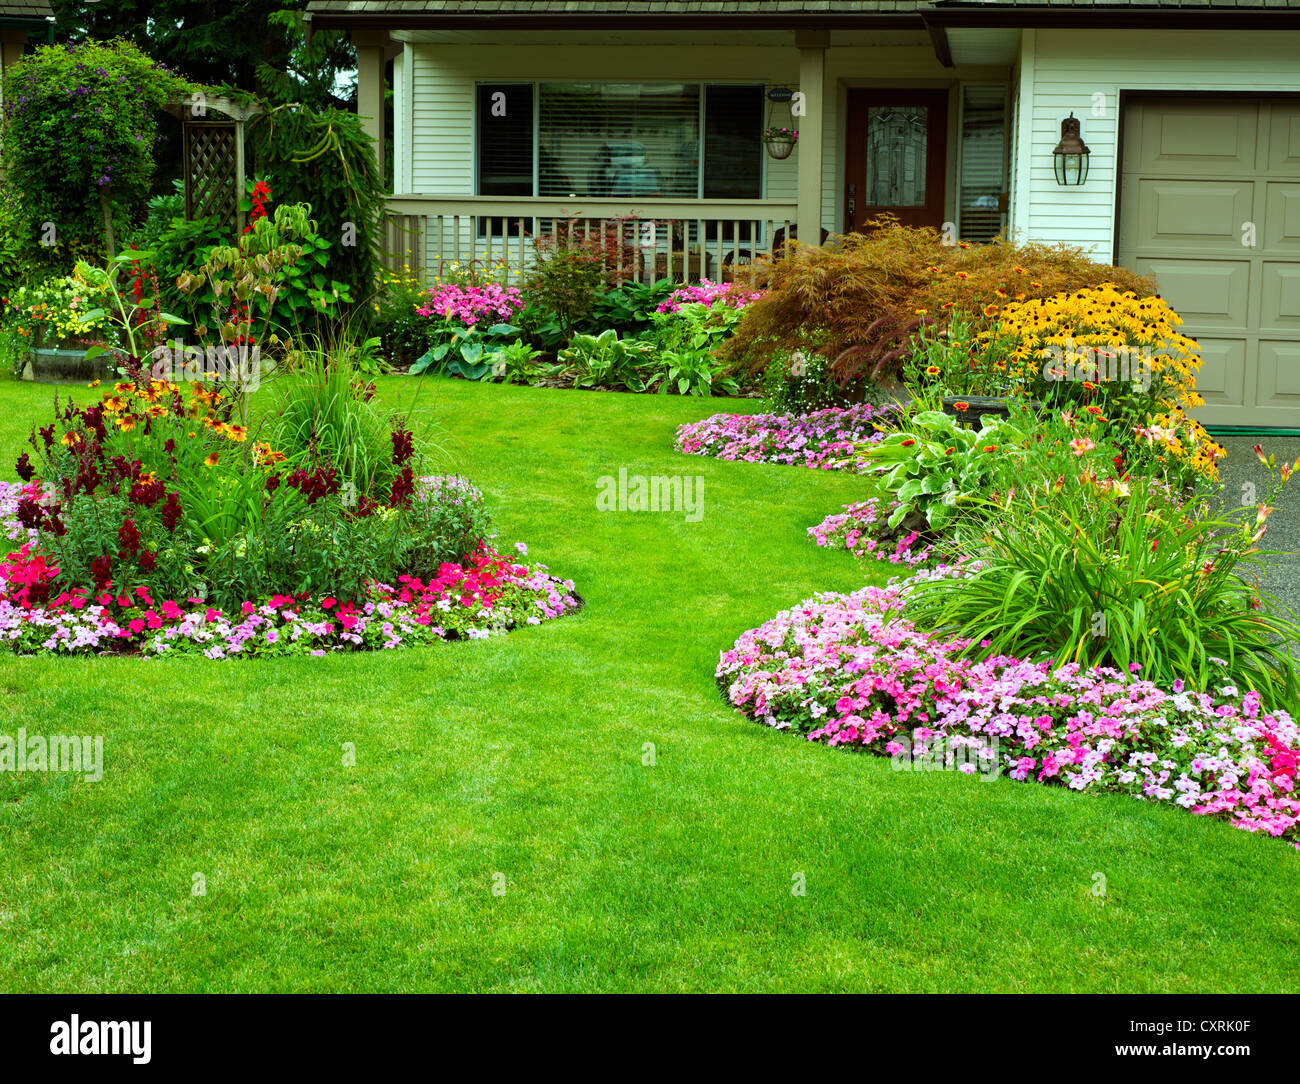 A beautifully manicured yard with a garden full of perennials and annuals. Stock Photo